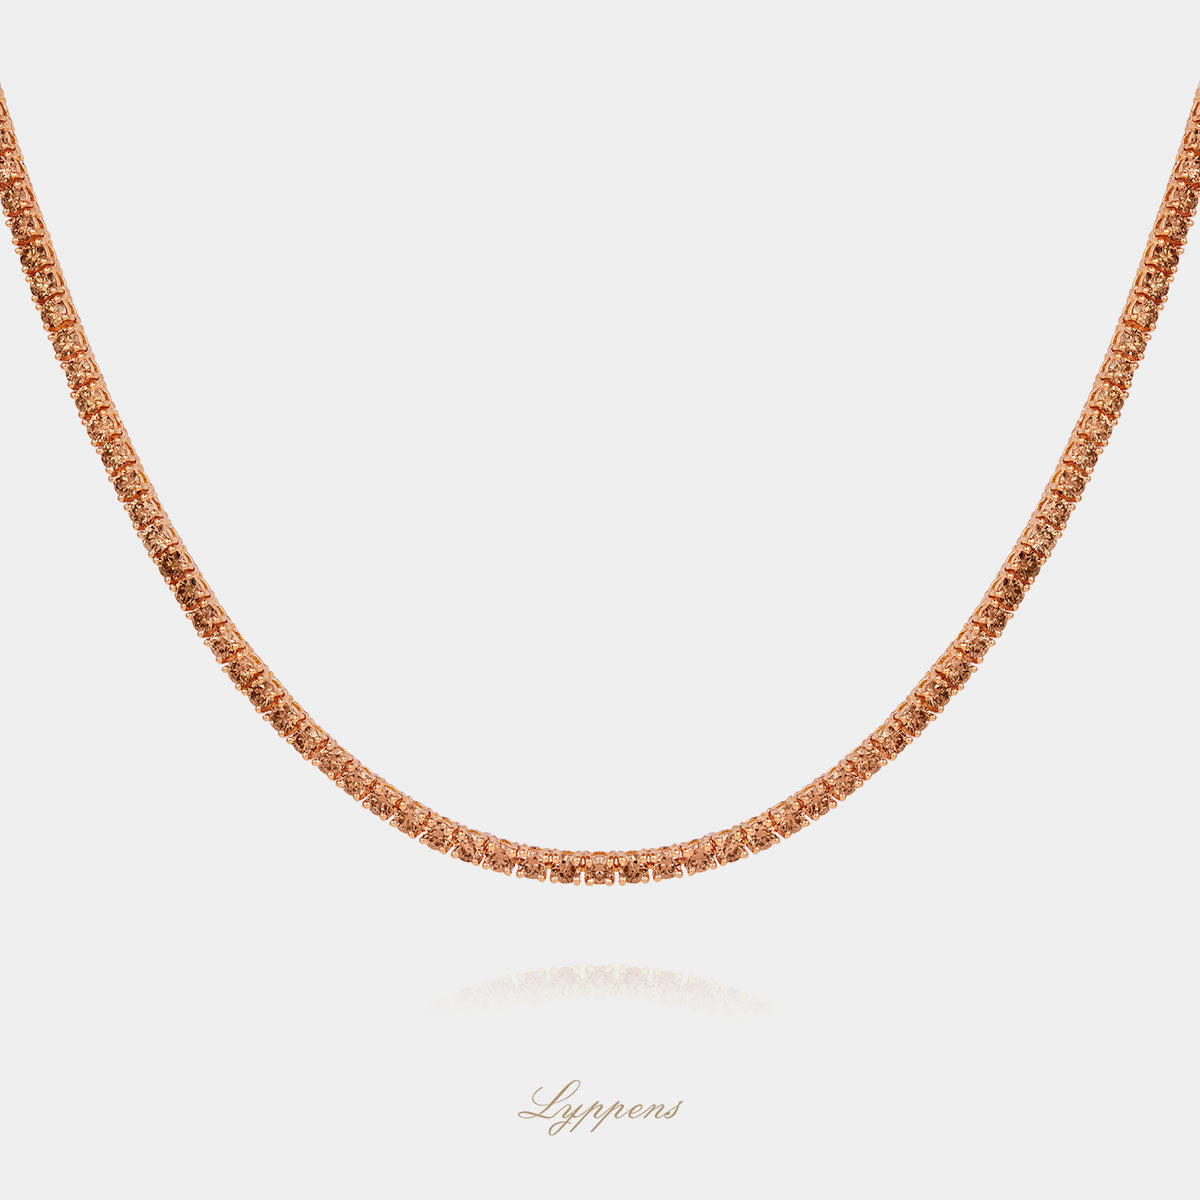 Rose gold tennis necklace with brown diamond 8.90ct.